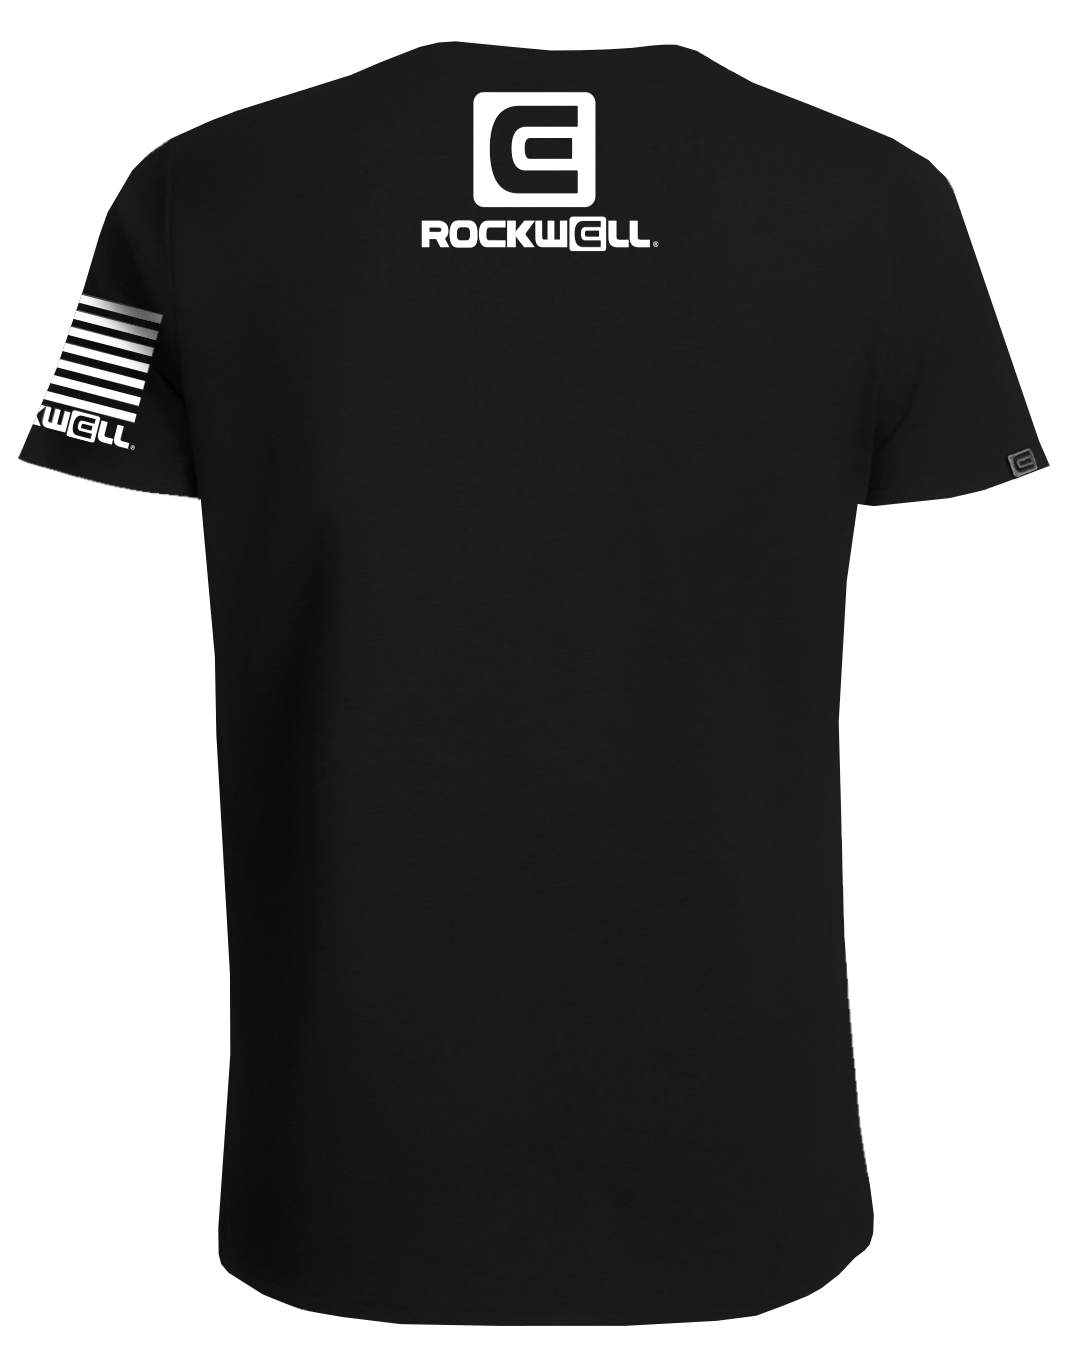 Rockwell stacked logo on top part of the back. Rockwell flag logo on the sleeve